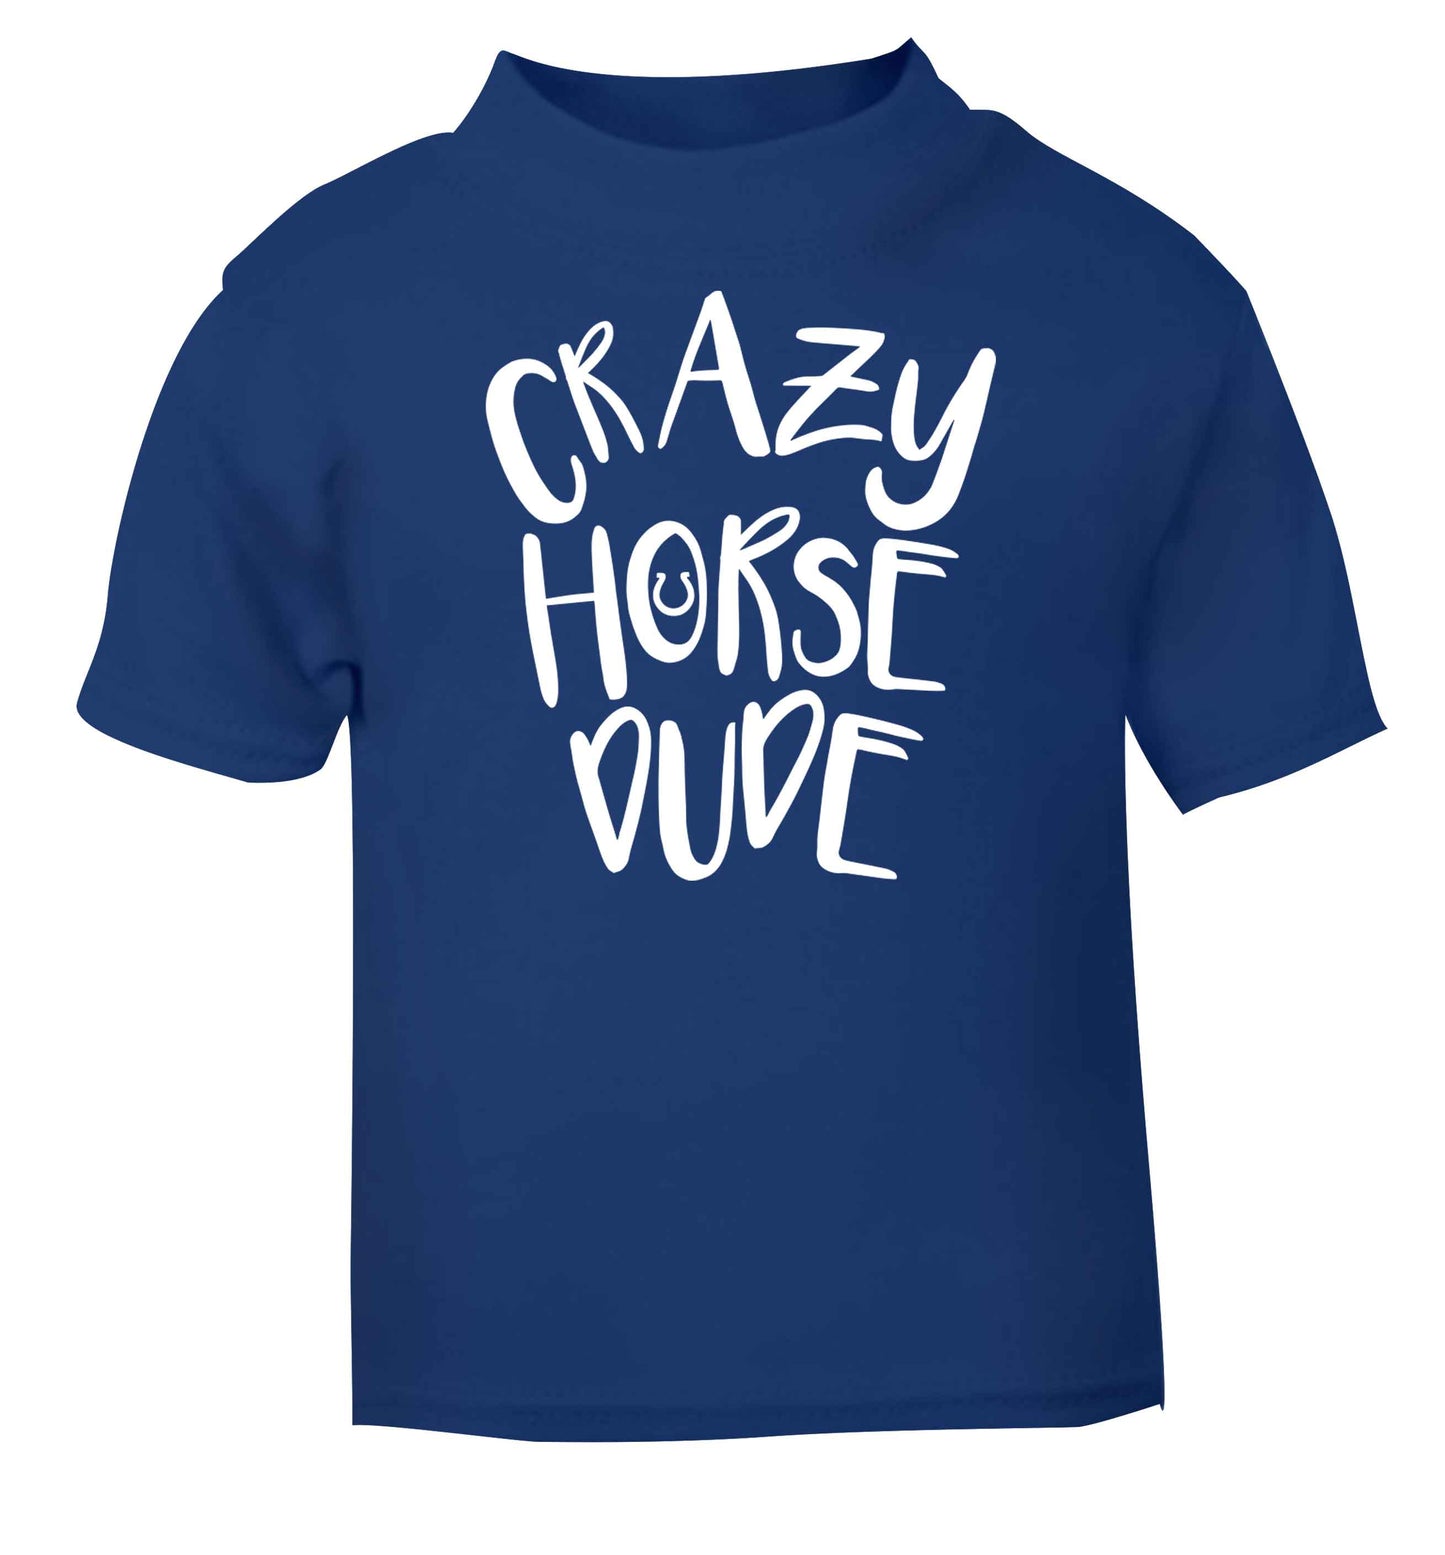 Crazy horse dude blue baby toddler Tshirt 2 Years